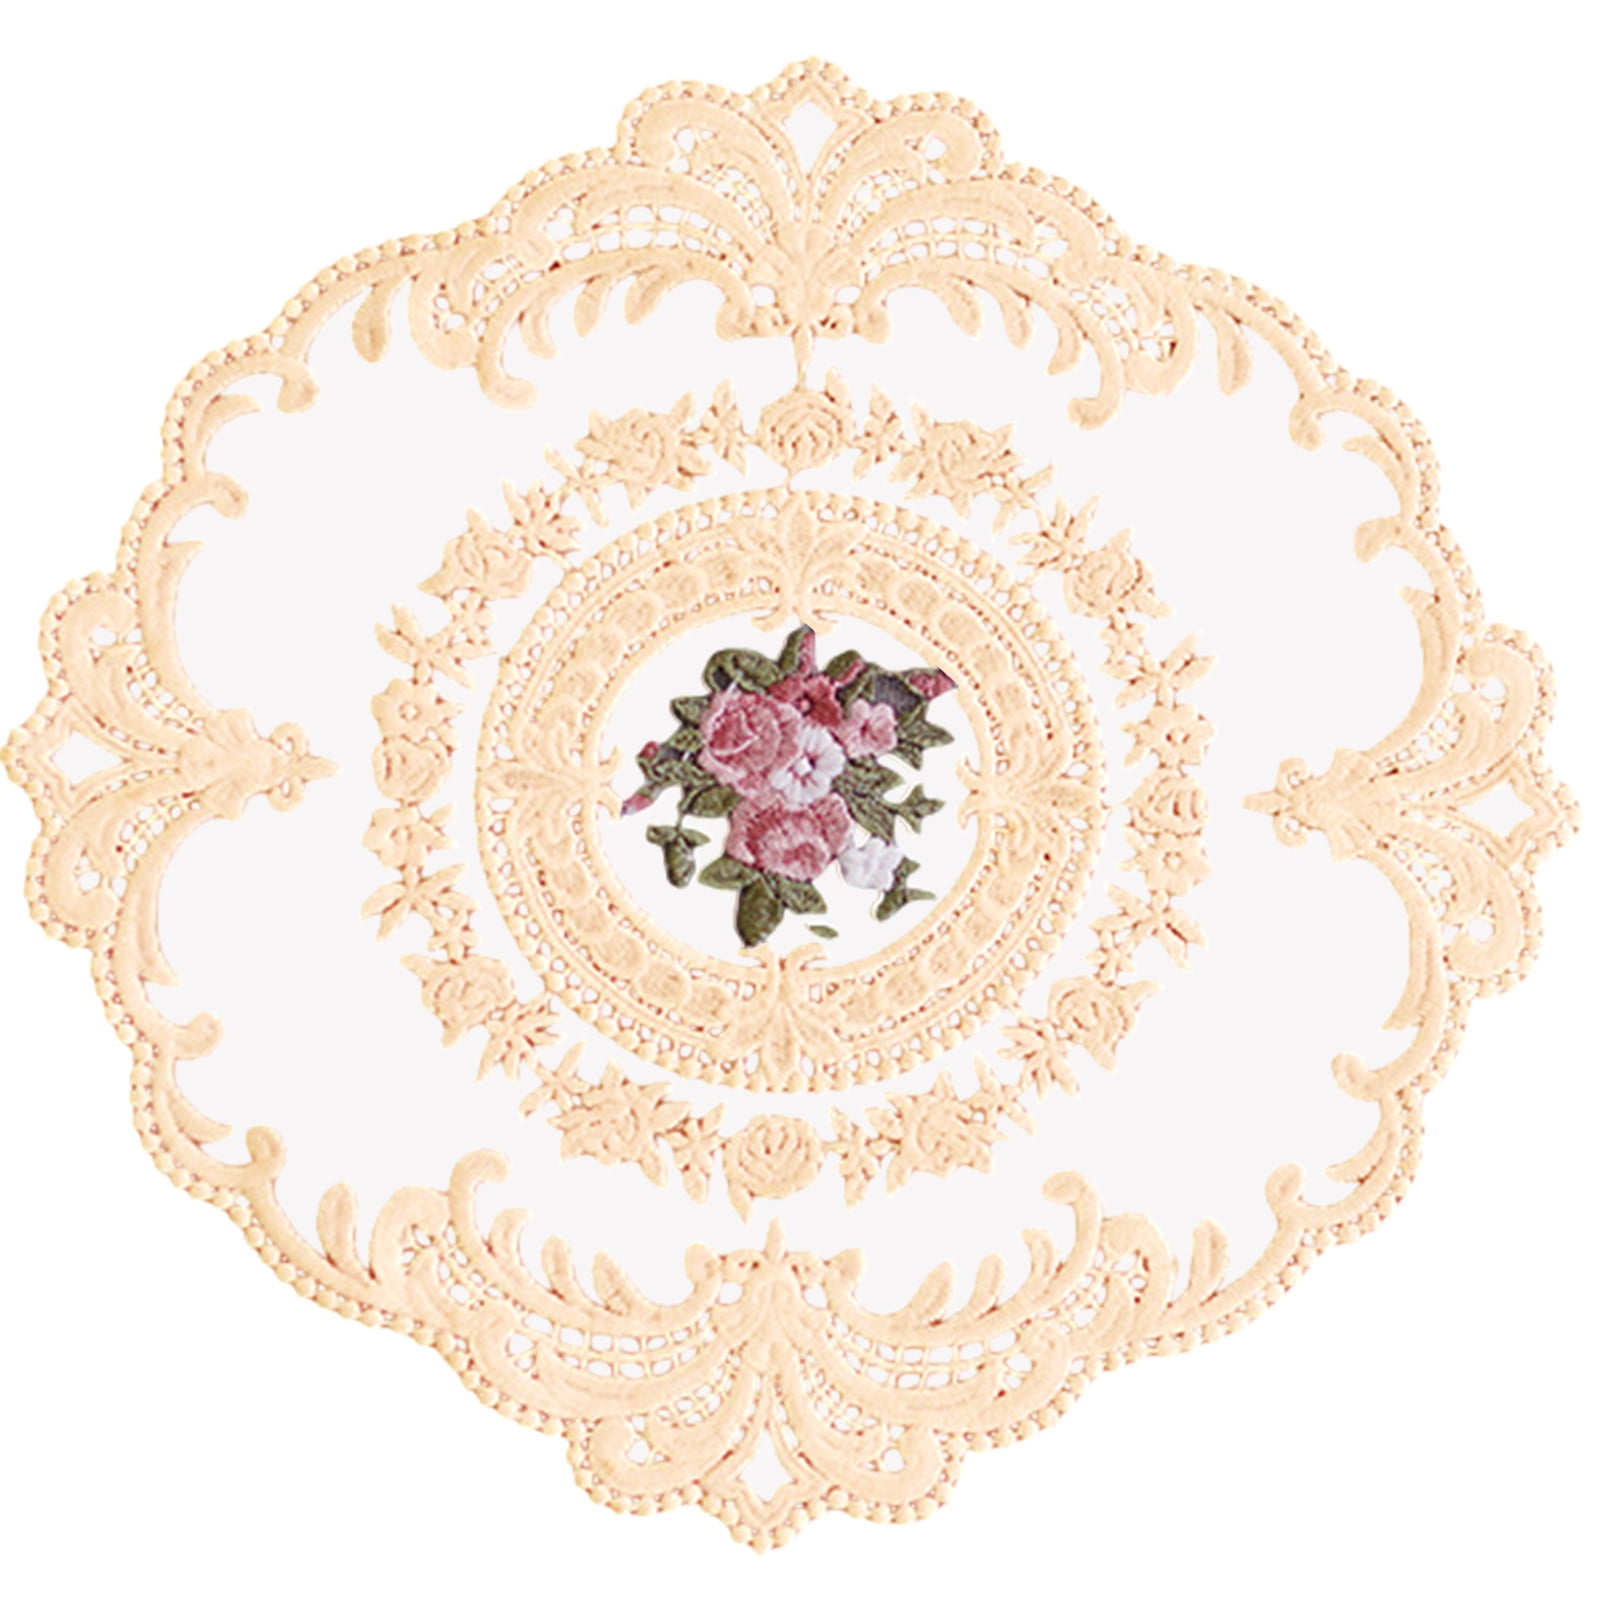 4pcs Round Embroidered Lace Floral Fabric Coffee Dining Table Placemats Kitchen 